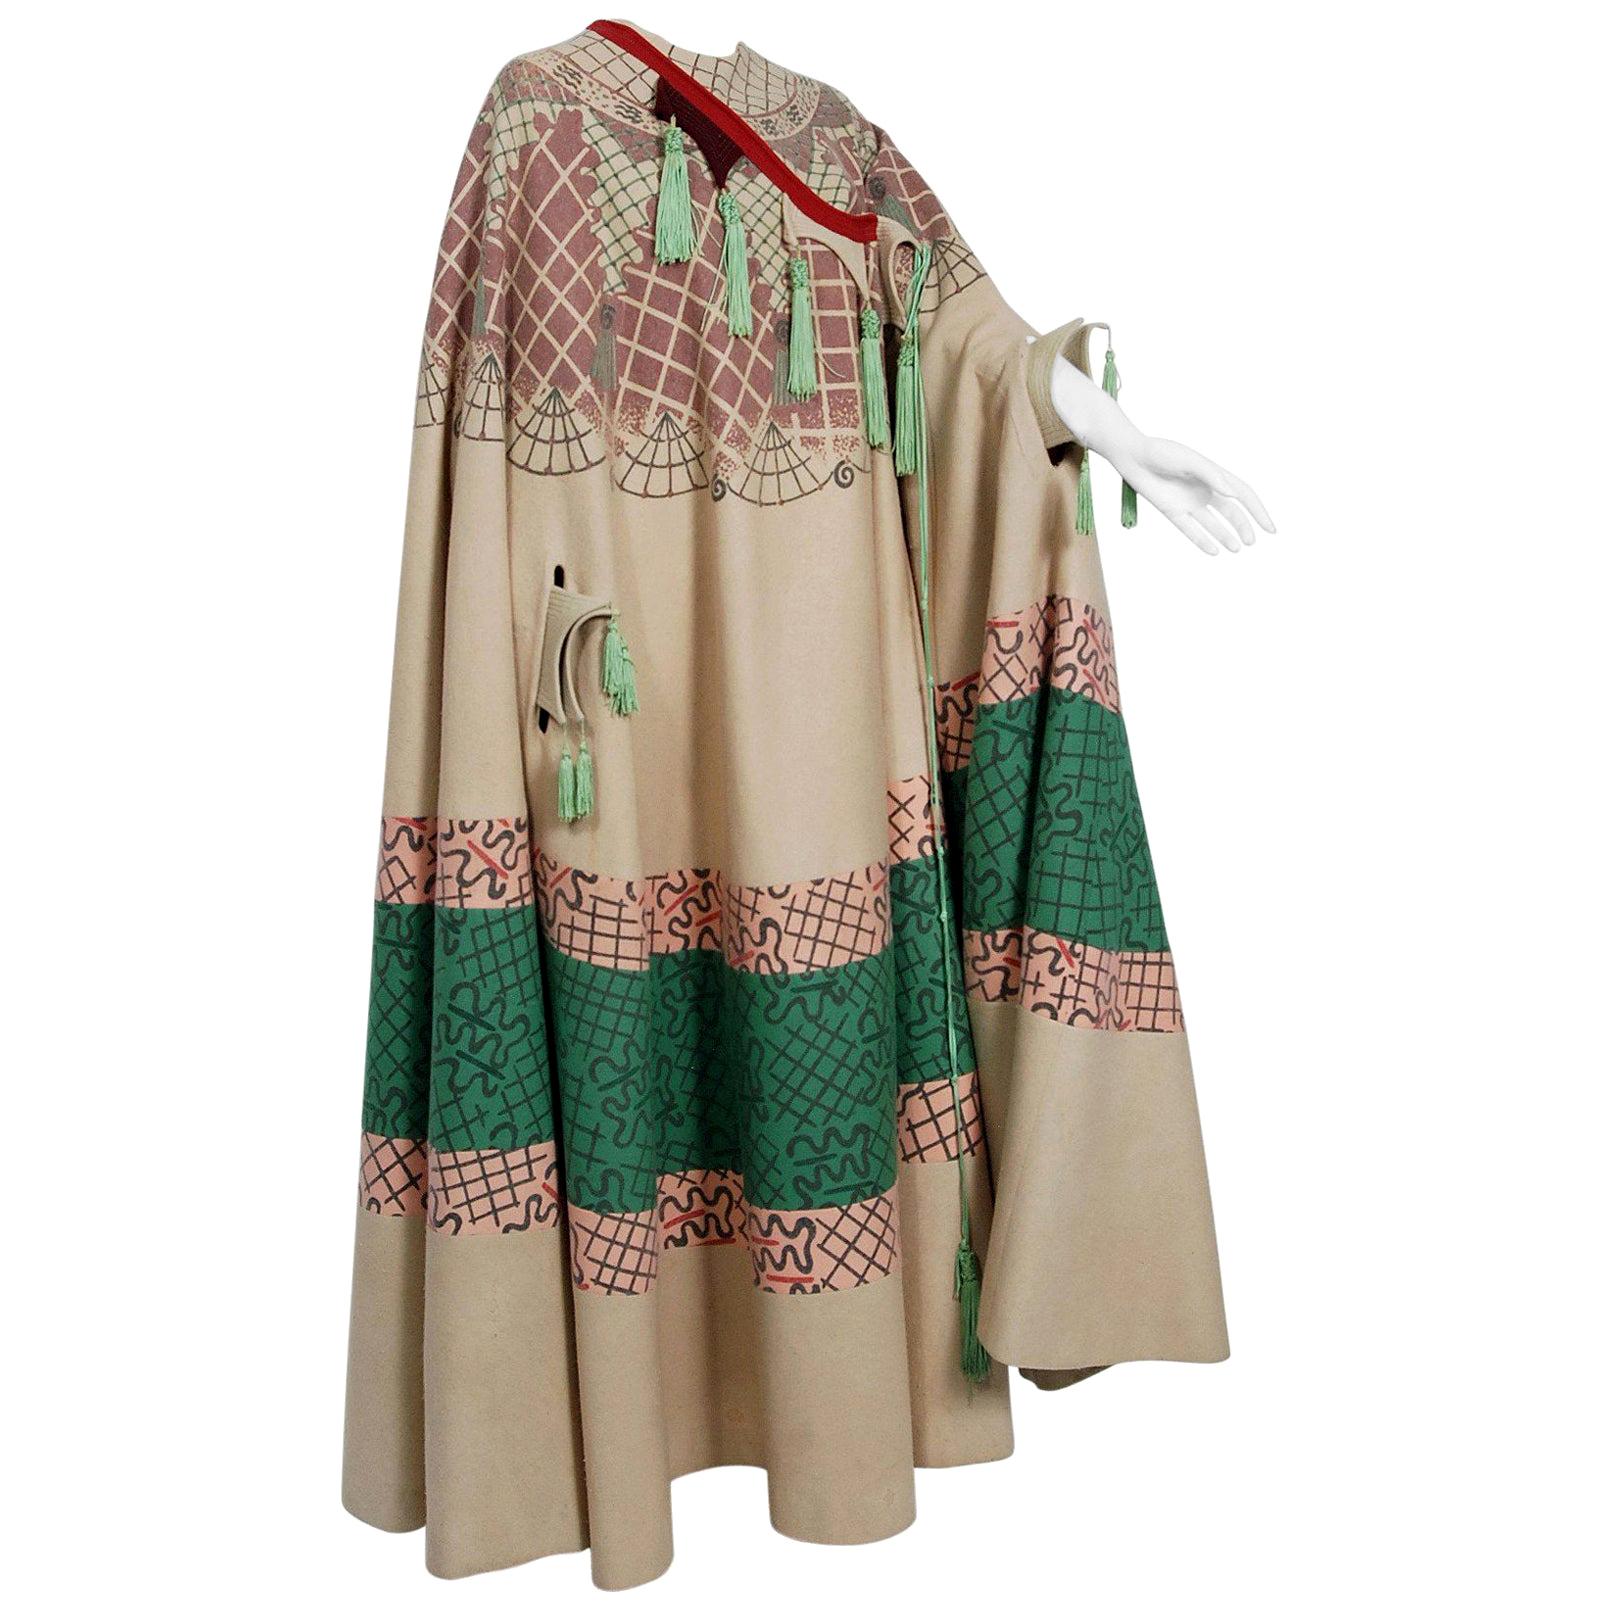 Vintage 1970 Zandra Rhodes Couture Graphic Print Wool Tassels Full-Length Cape